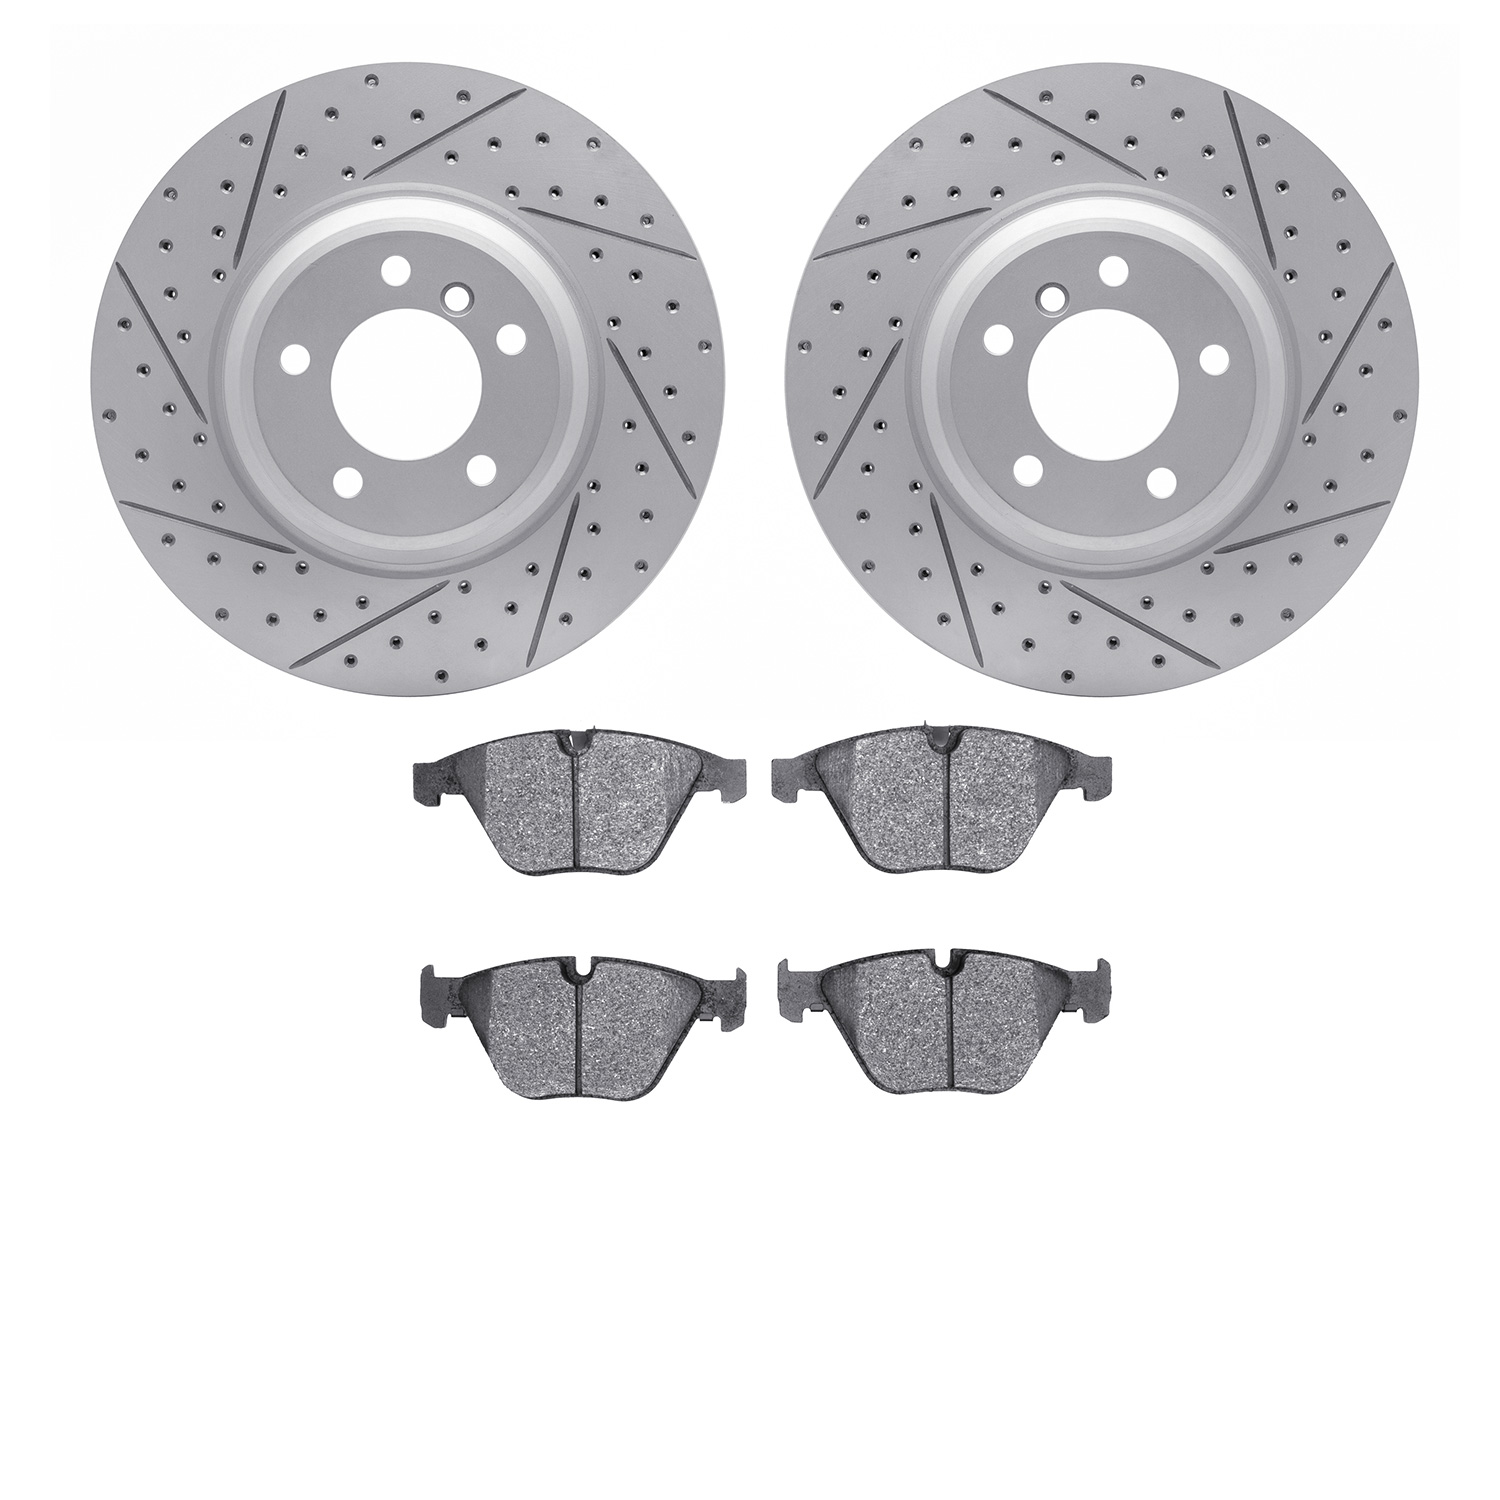 2502-31070 Geoperformance Drilled/Slotted Rotors w/5000 Advanced Brake Pads Kit, 2007-2015 BMW, Position: Front